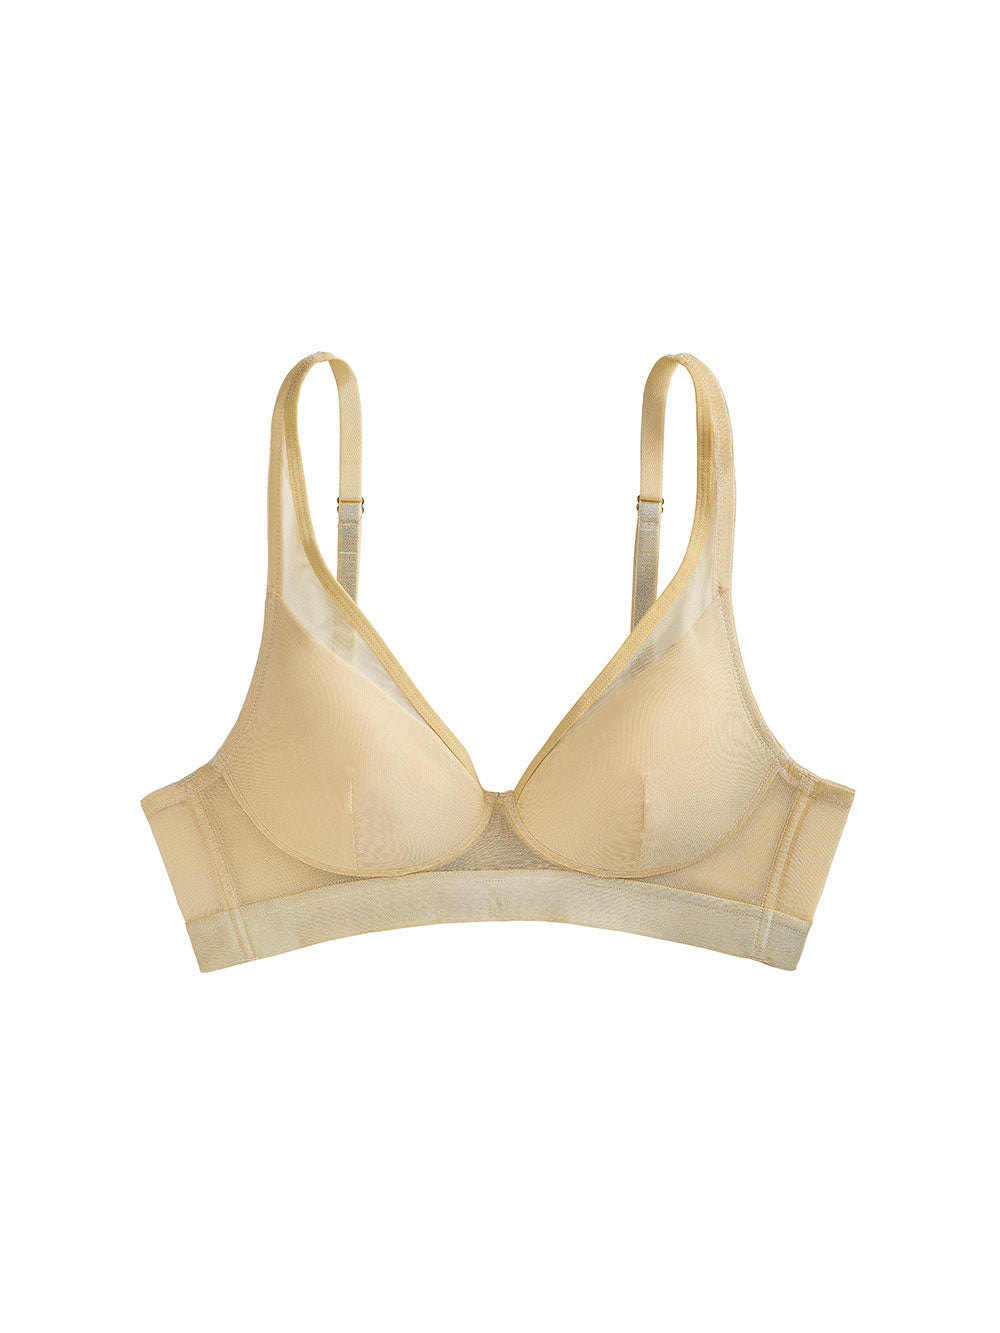 Taylor Wire-free Bra, Petite, Lightly Lined, Wide Band, Bralette